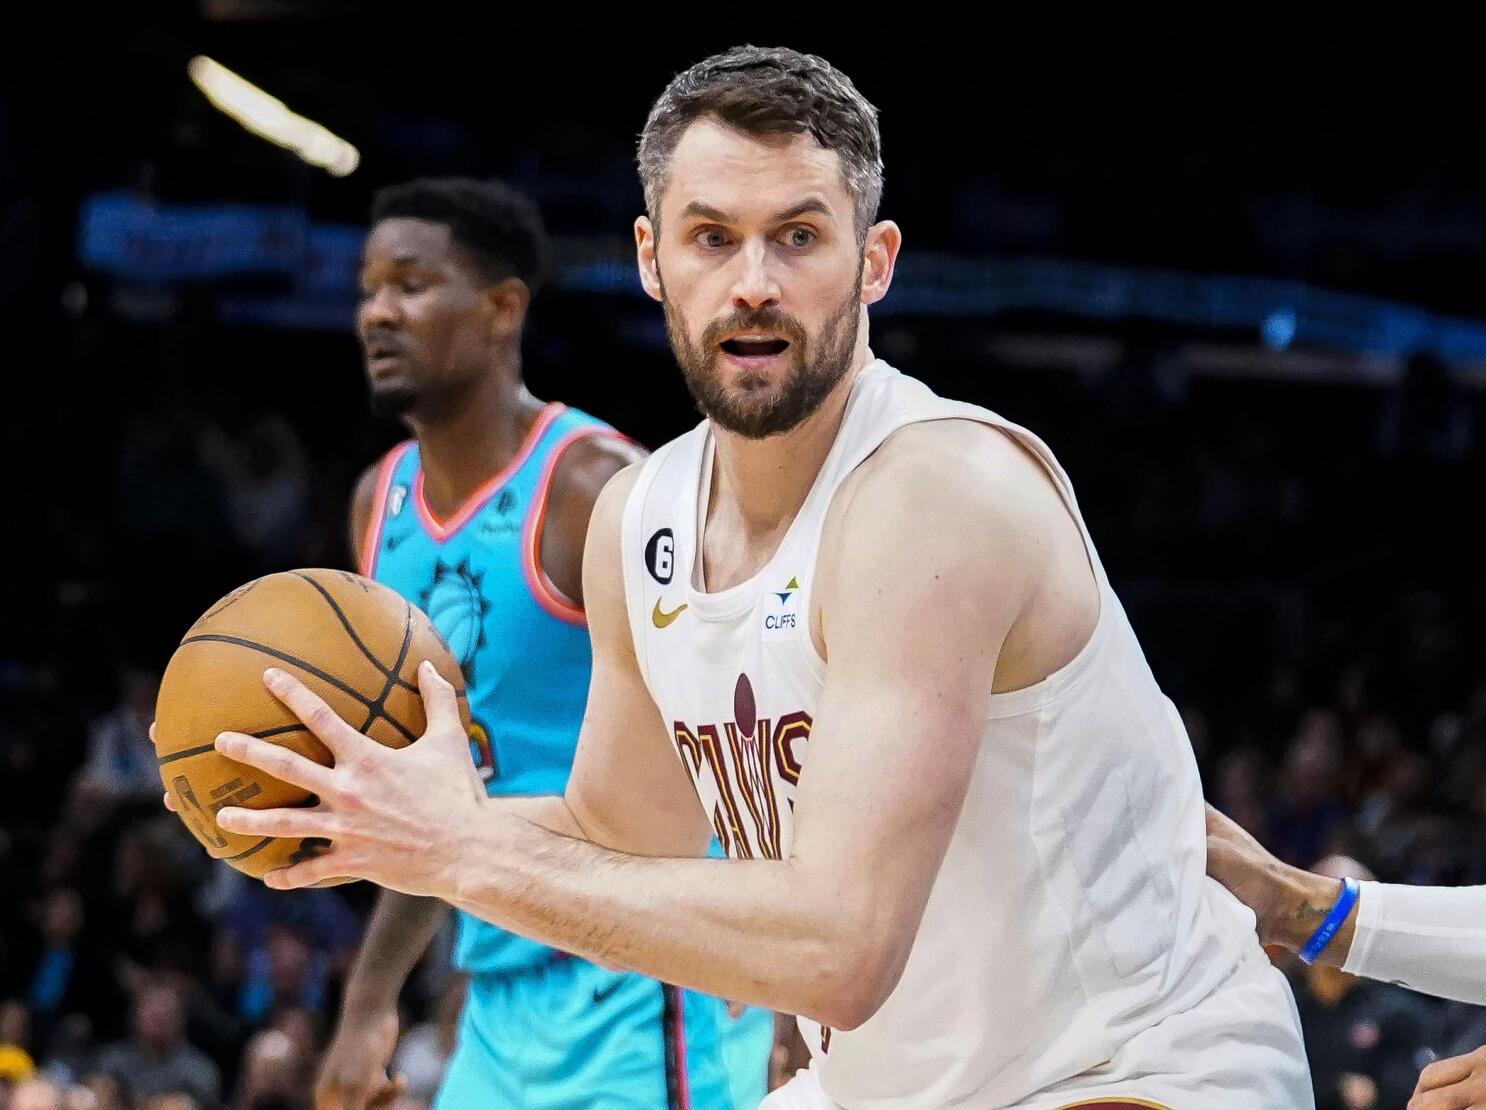 NBA Rumors: Cleveland Cavaliers Could Trade Kevin Love And